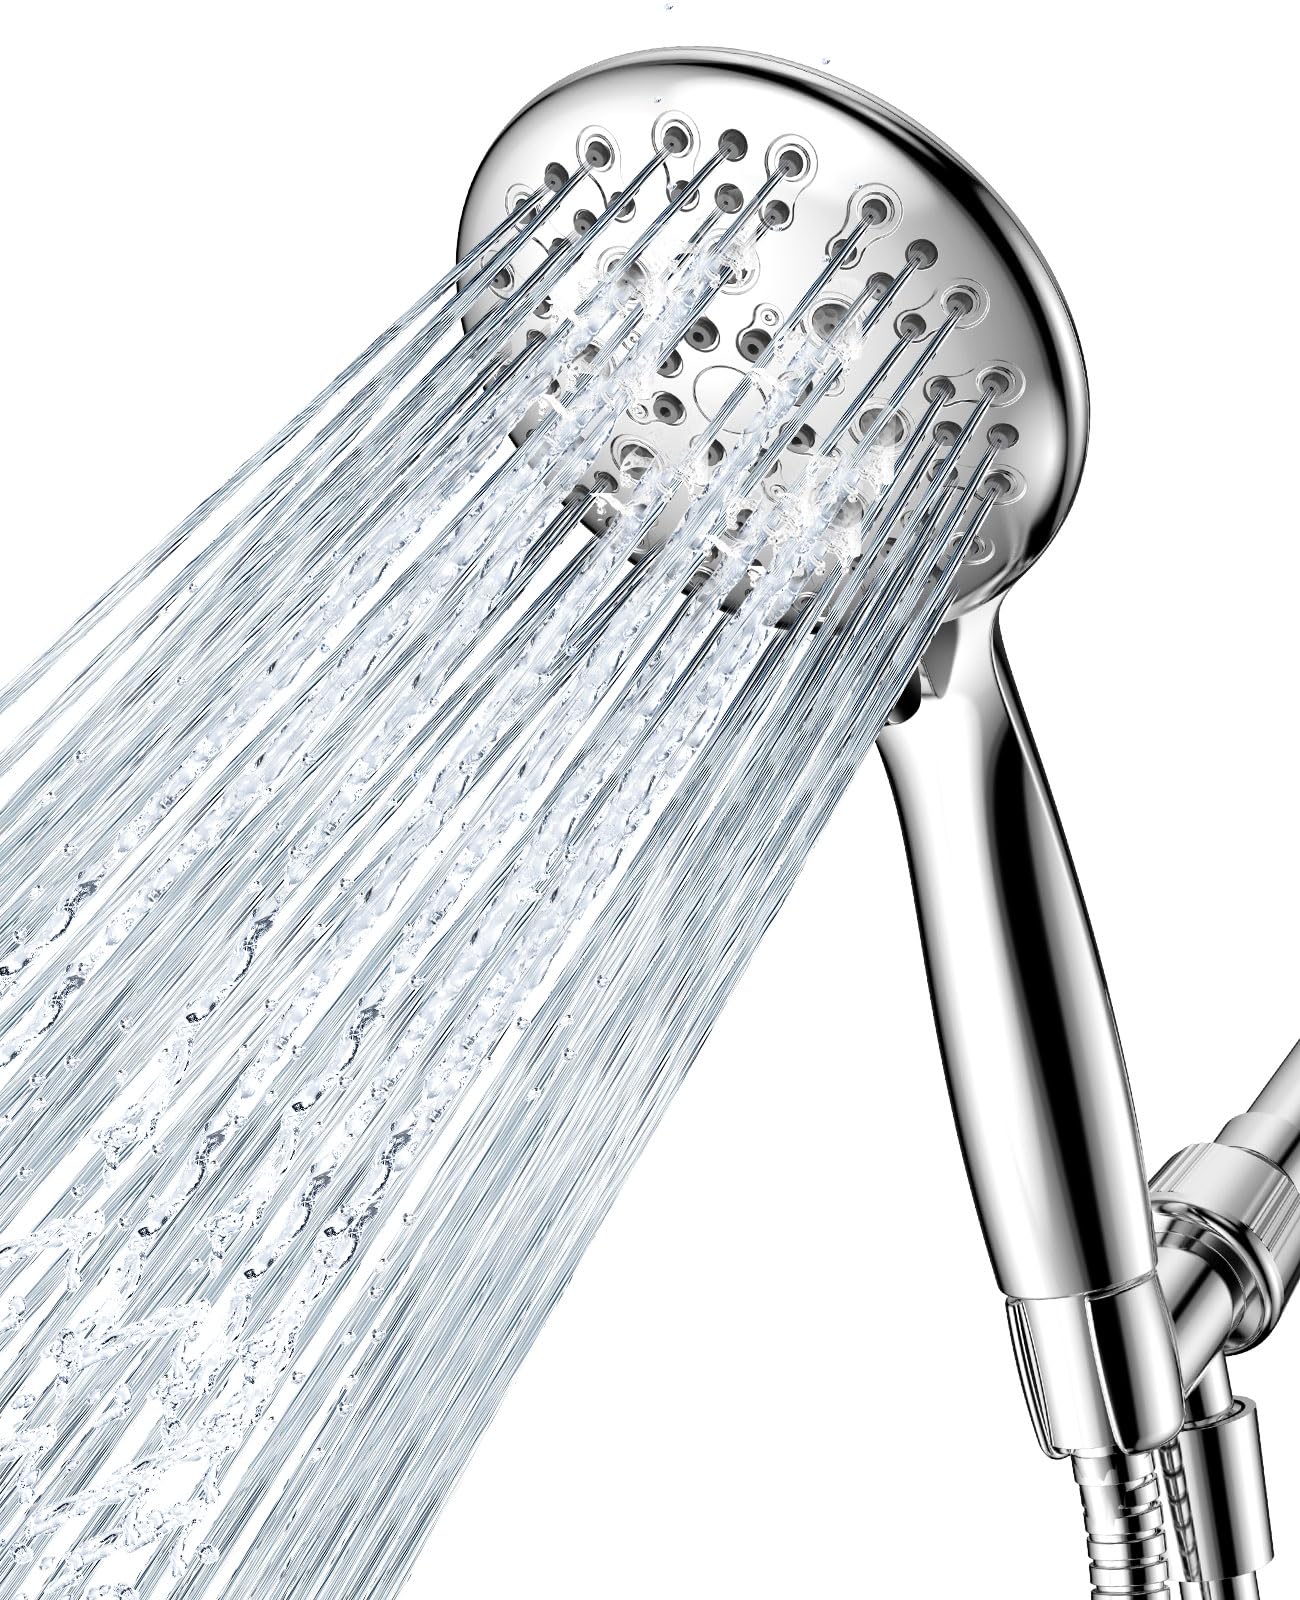 JDO Shower Head with Handheld, 6 Spray Settings High Pressure Hand Held Shower Head, 4.3" High Flow Rain Showerhead Set with Extra Long 59" Stainless Steel Hose and Adjustable Bracket (Chrome)